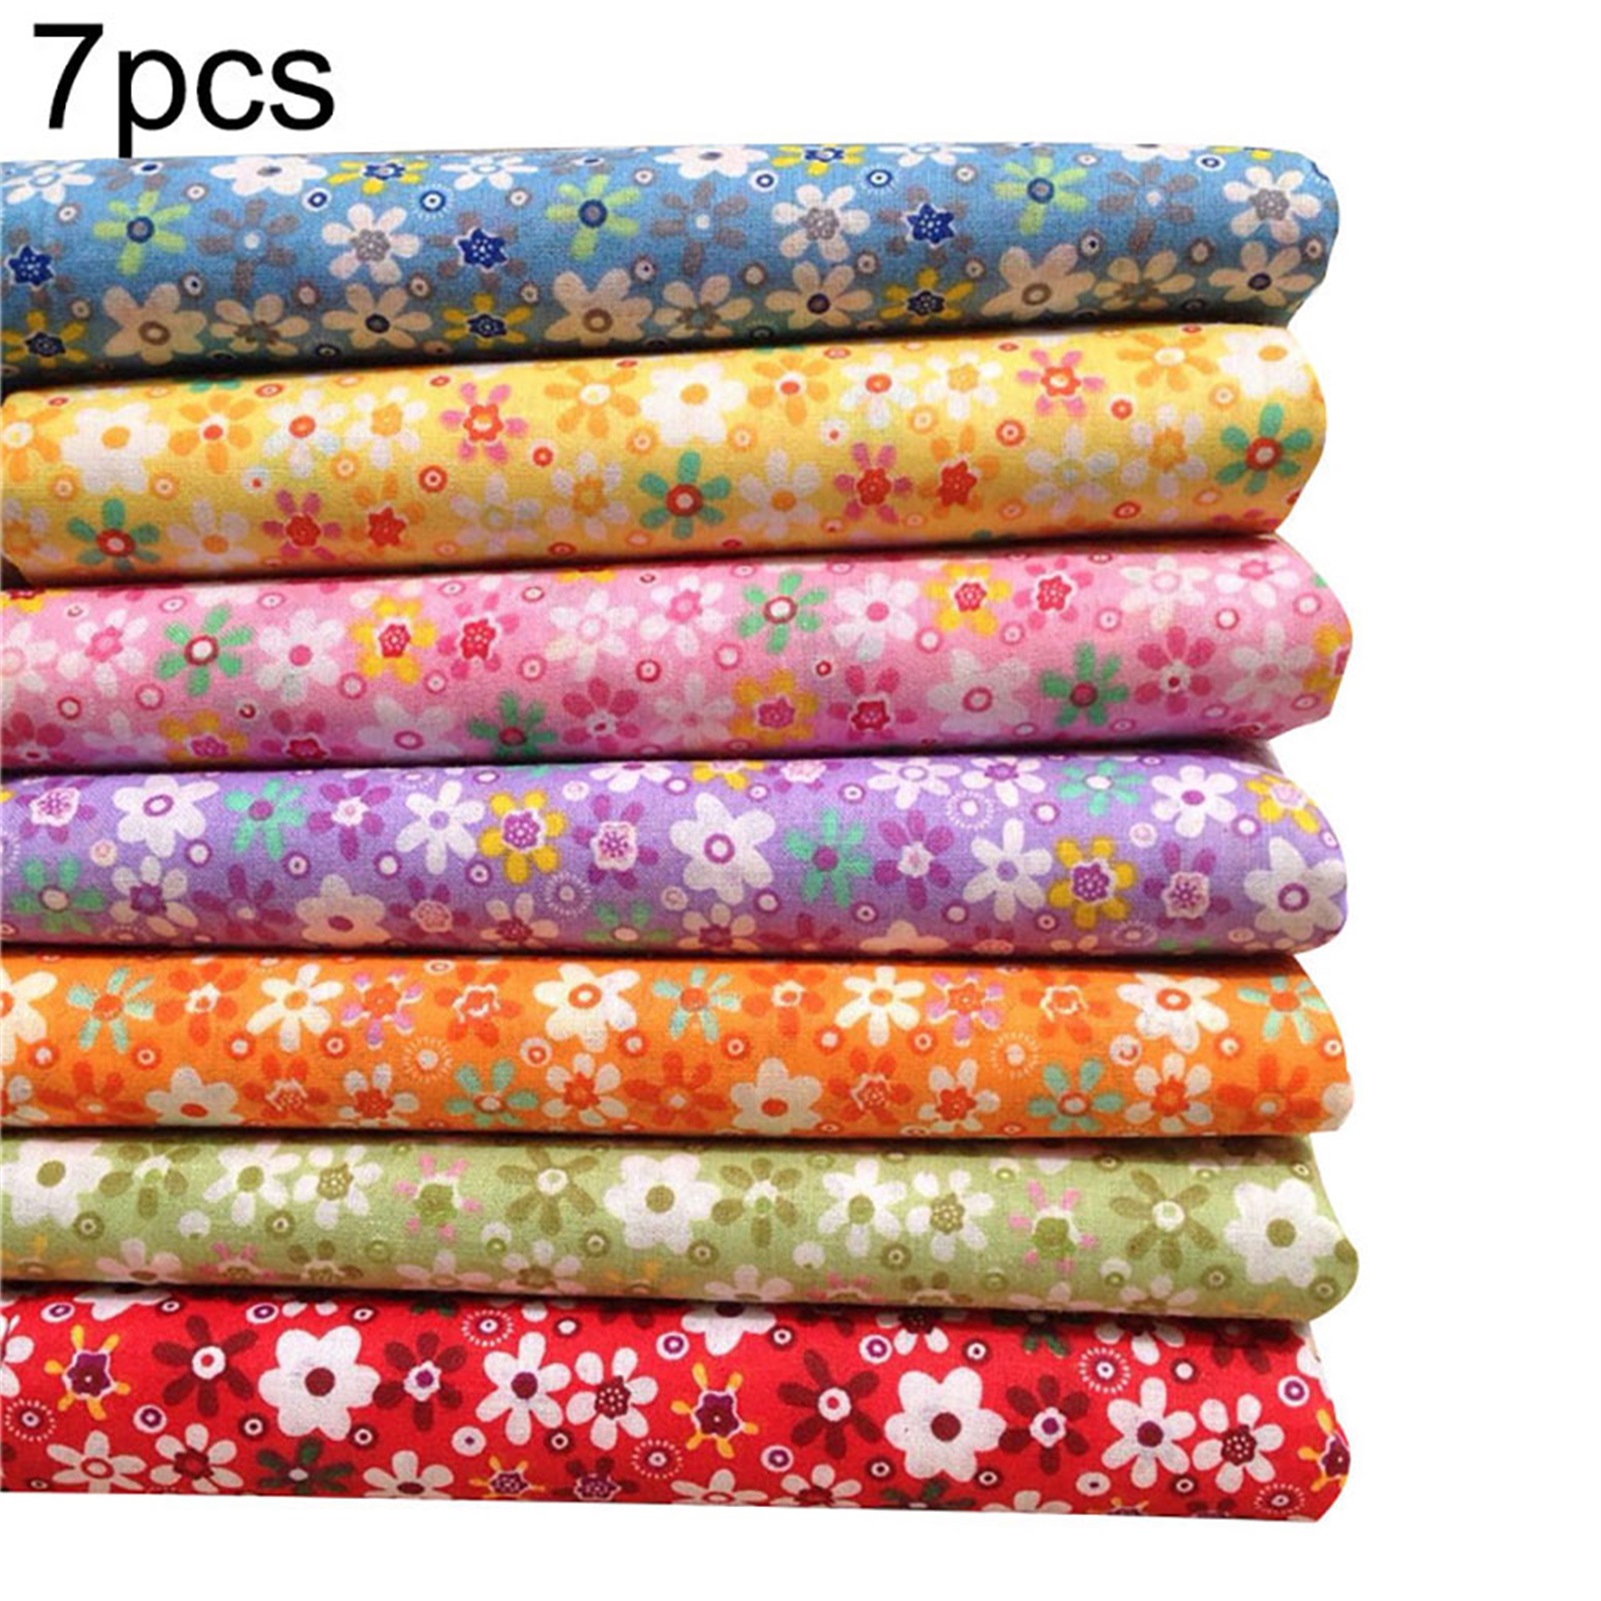 SPRING PARK 7Pcs/Set Soft Floral Print Cotton Cloth Fabric Hand Craft Sewing Material for DIY Handmade - image 2 of 7